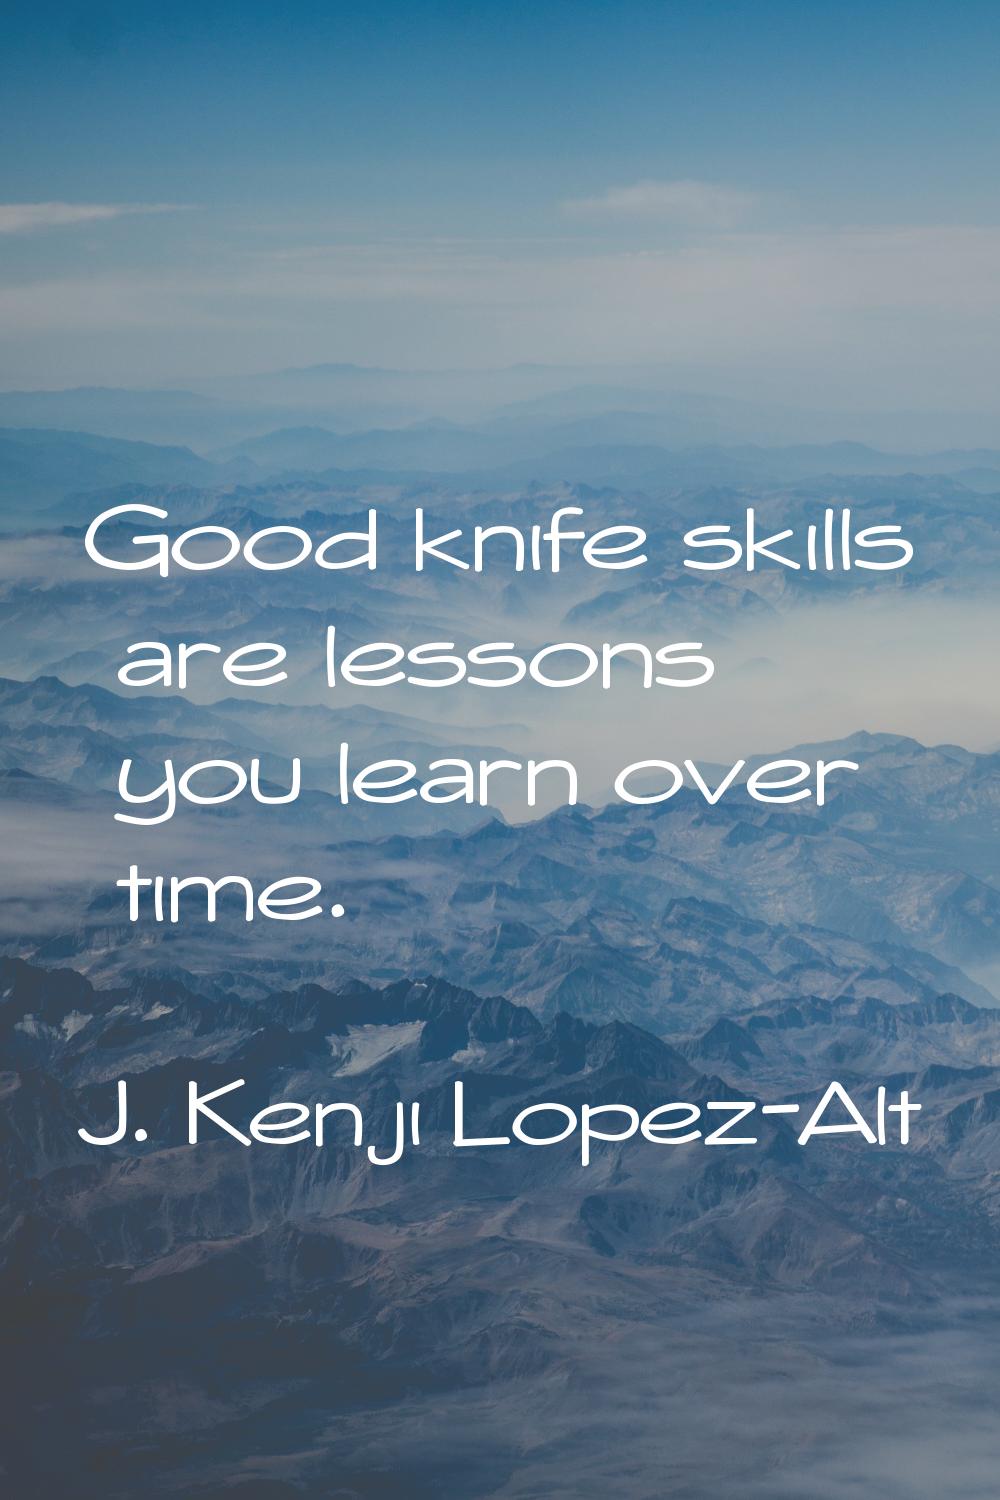 Good knife skills are lessons you learn over time.